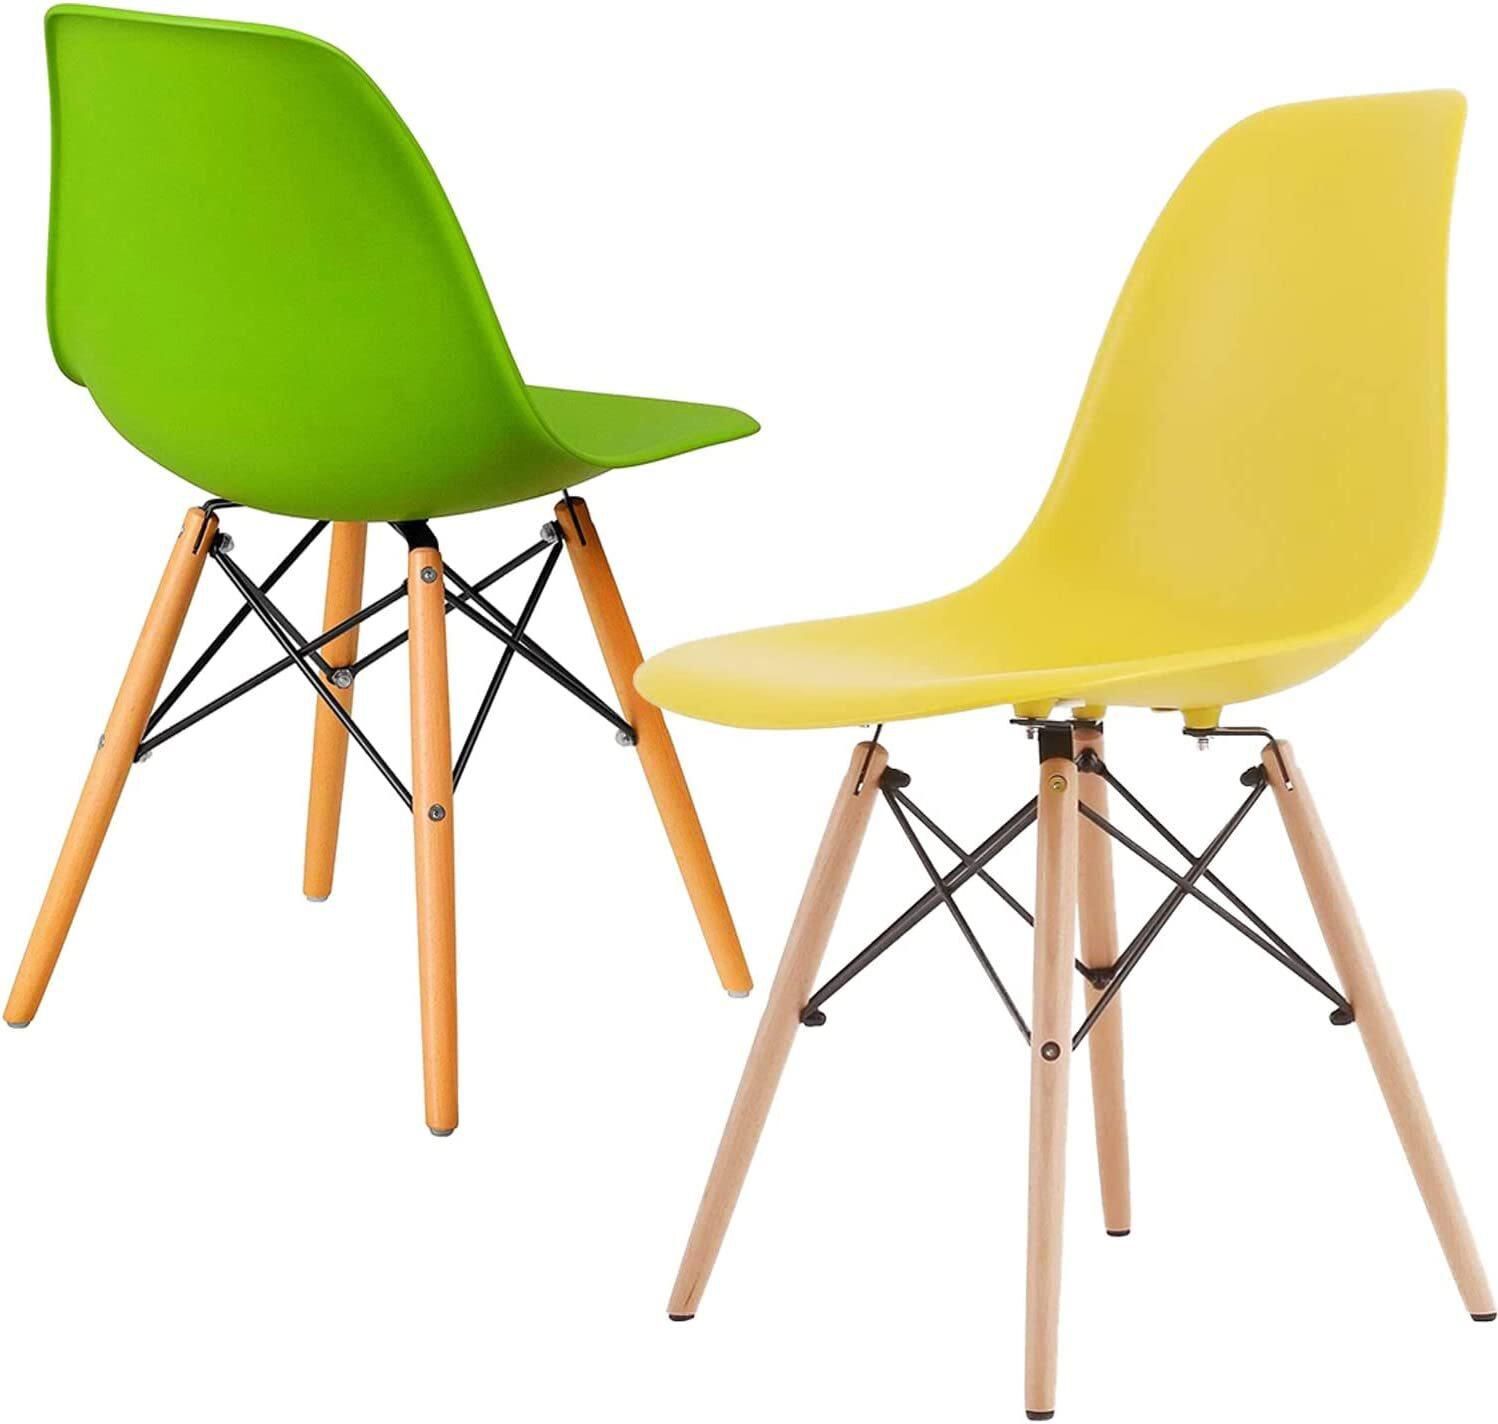 Dining Chairs, Modern Kitchen Dining Side Chair, Casual Shell Chair, Eames Style Chair, Plastic Chairs with Wooden Legs, for Home Office Hotel Bistro Cafe Restaurant, Set of 2 (Green&amp;Yellow)